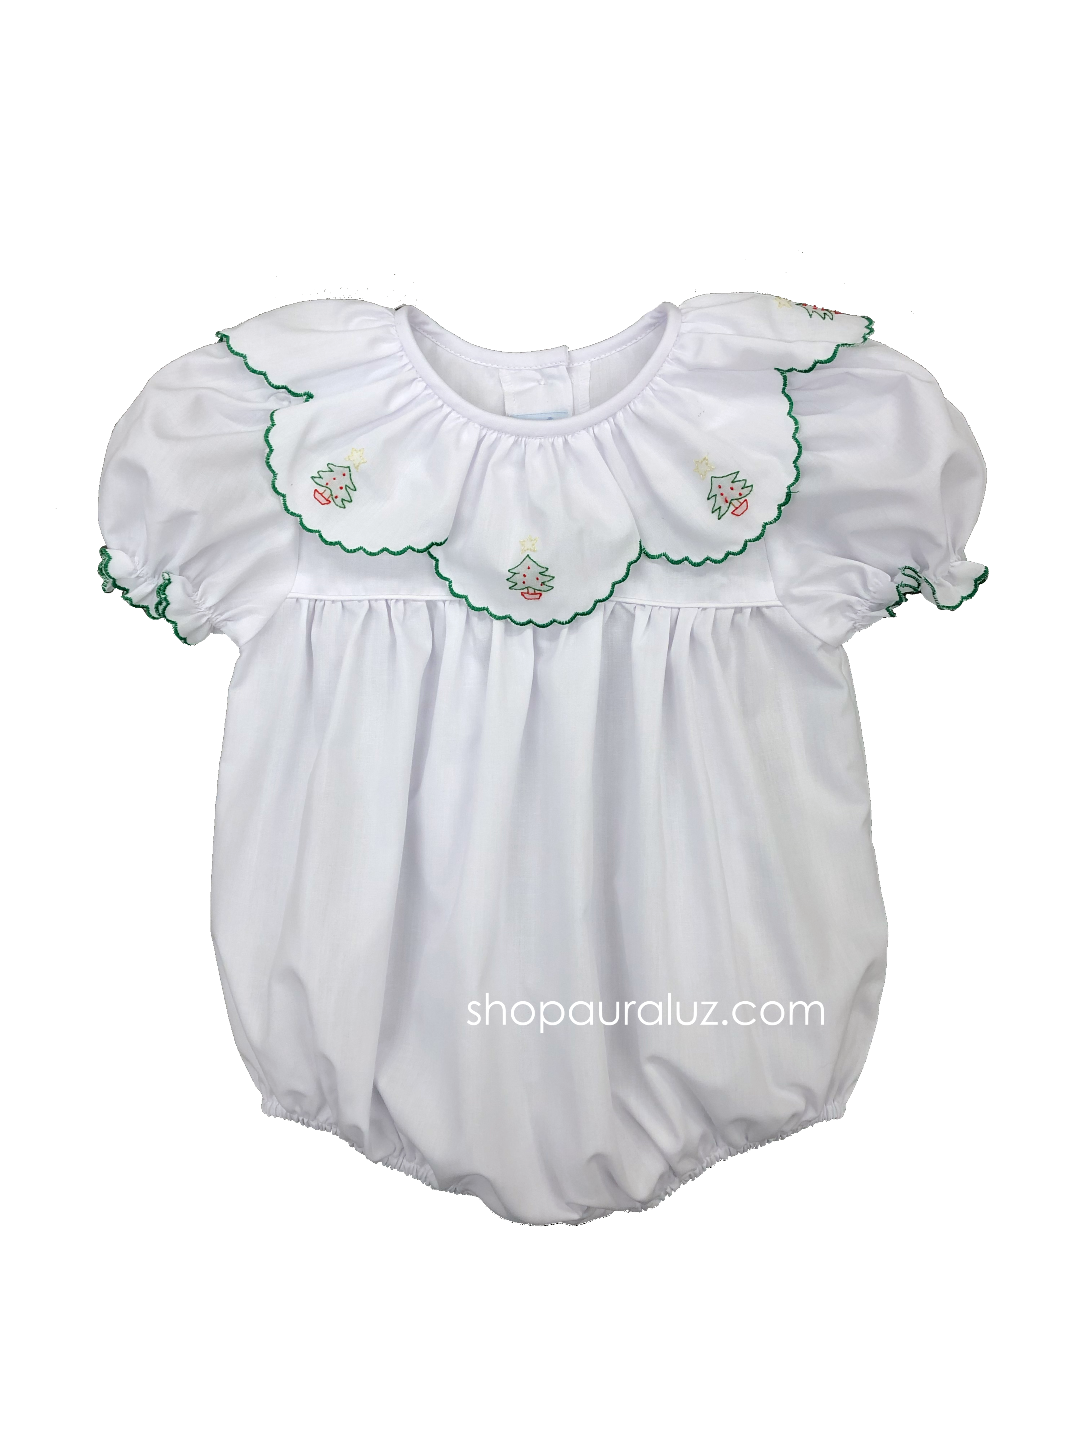 Auraluz Christmas Bubble...White with ruffle collar and embroidered trees